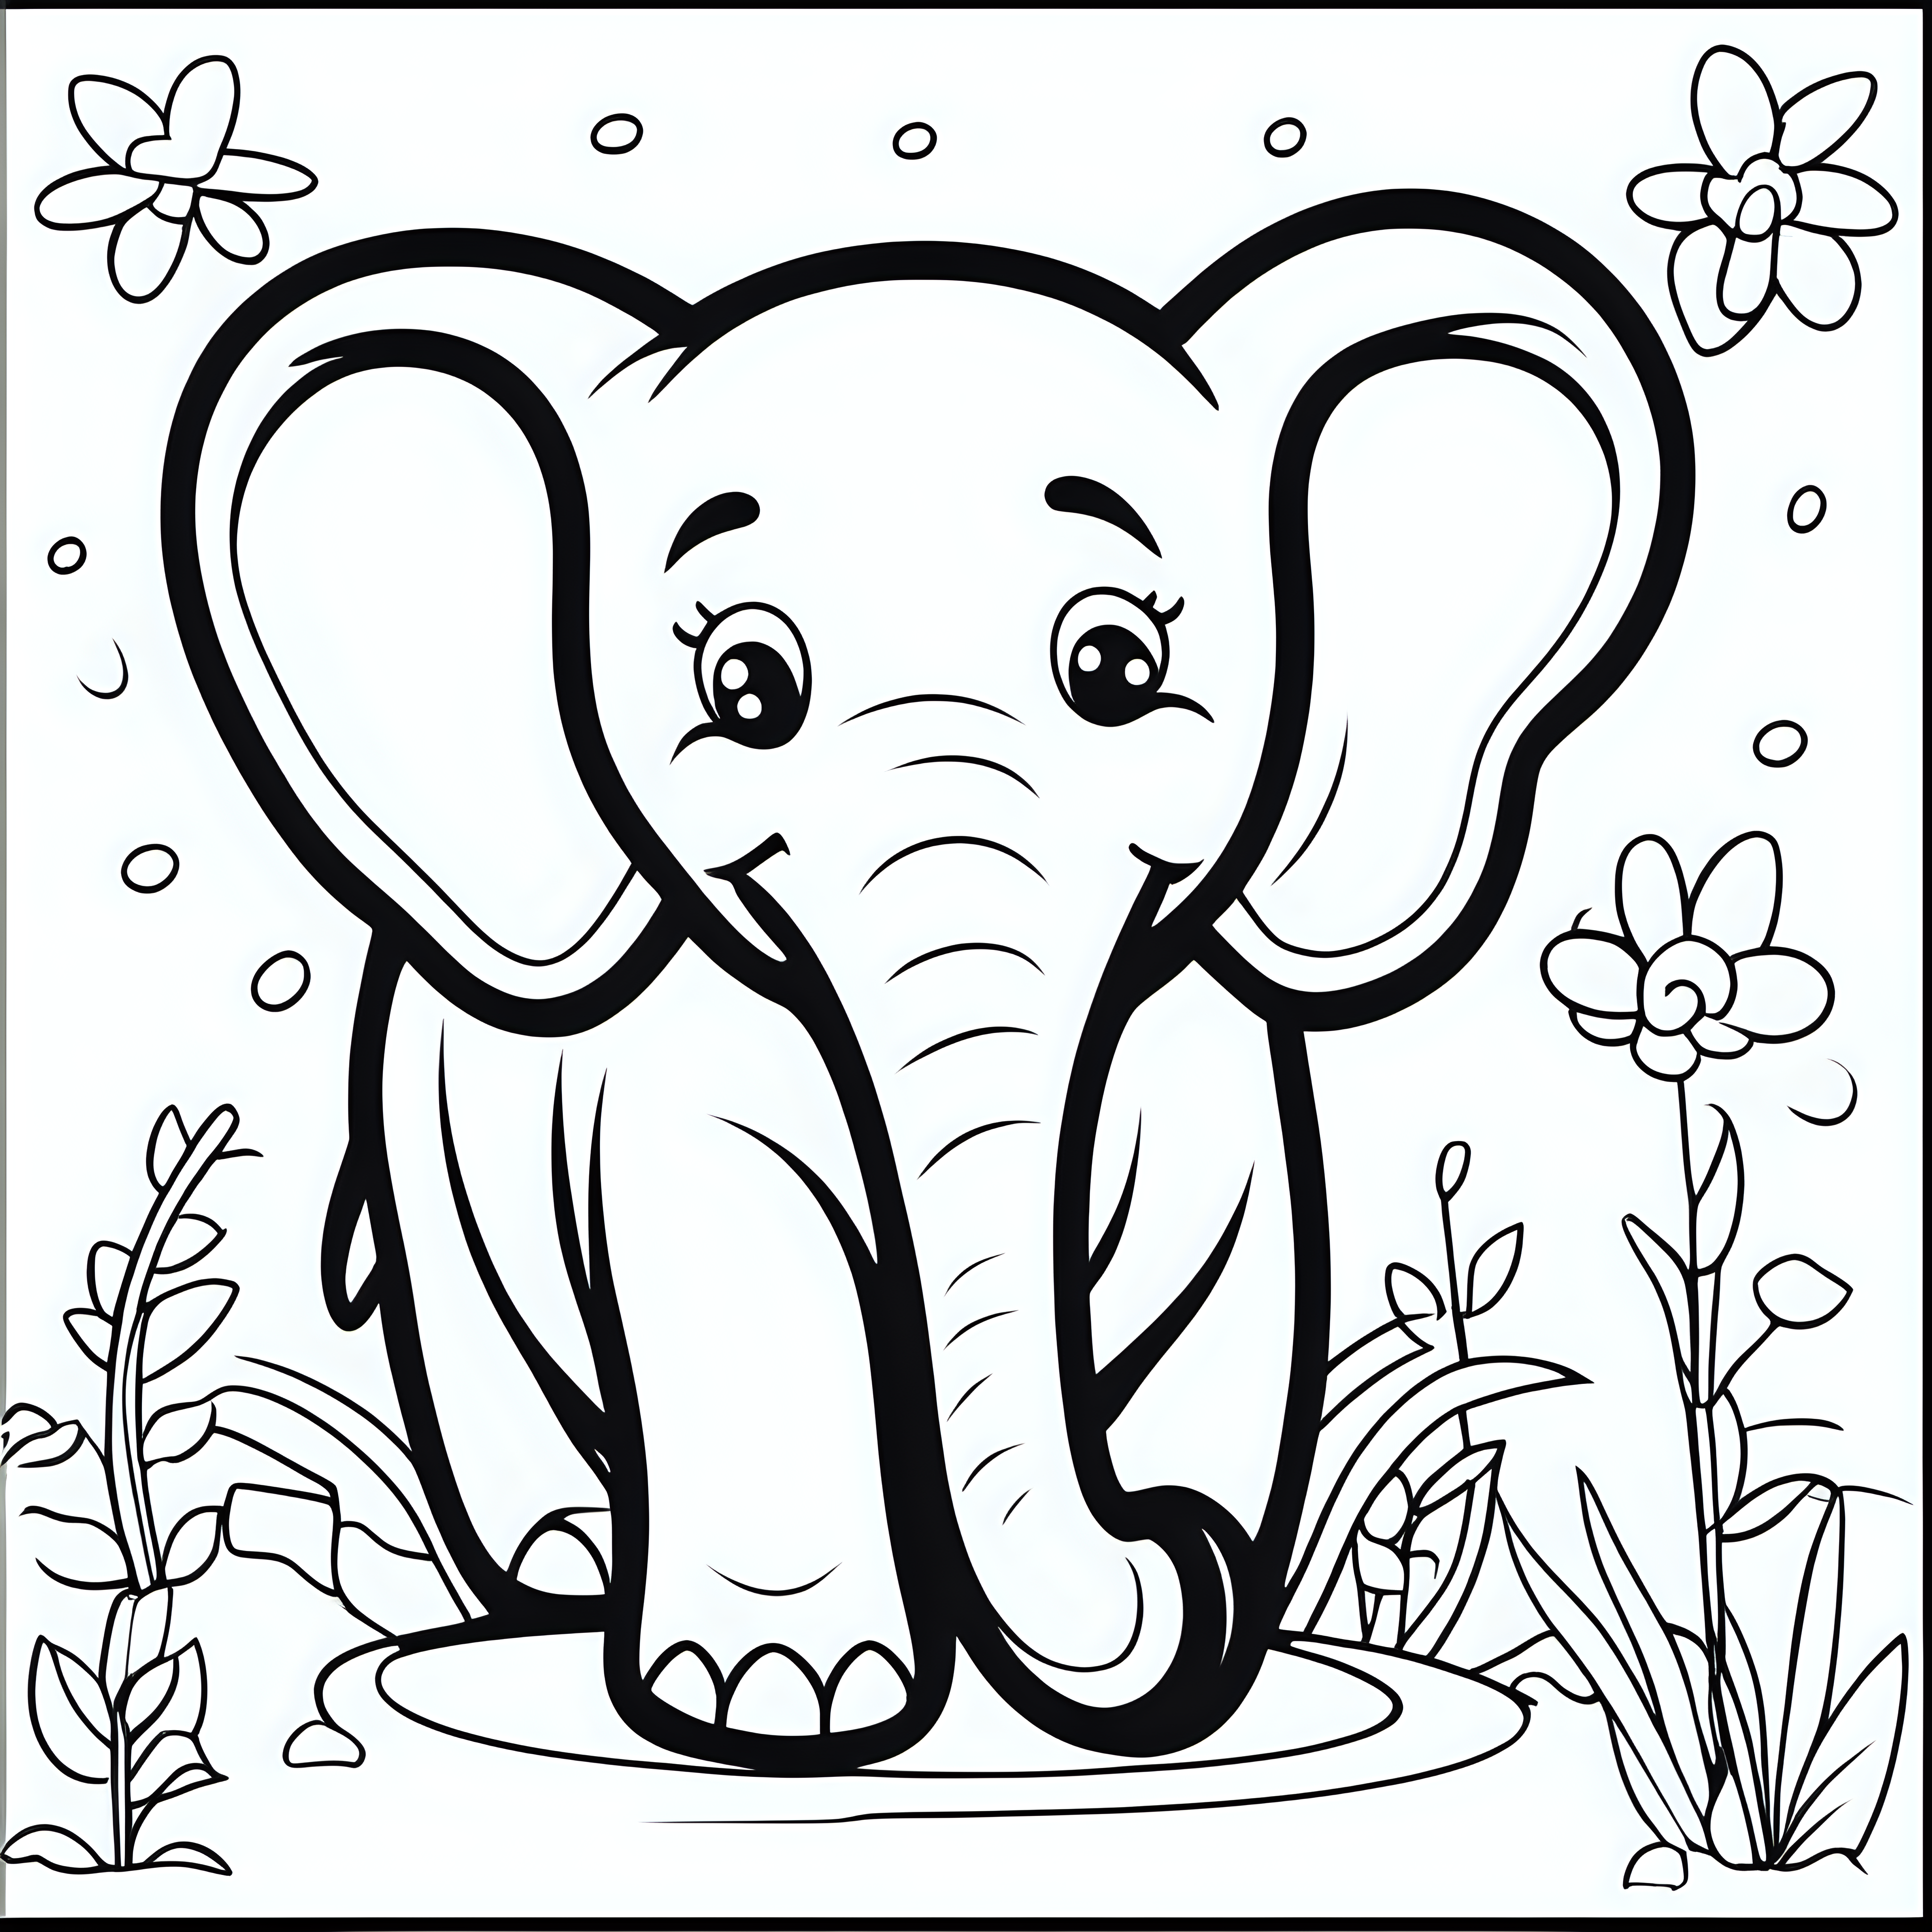 draw a cute elephant with only the outline